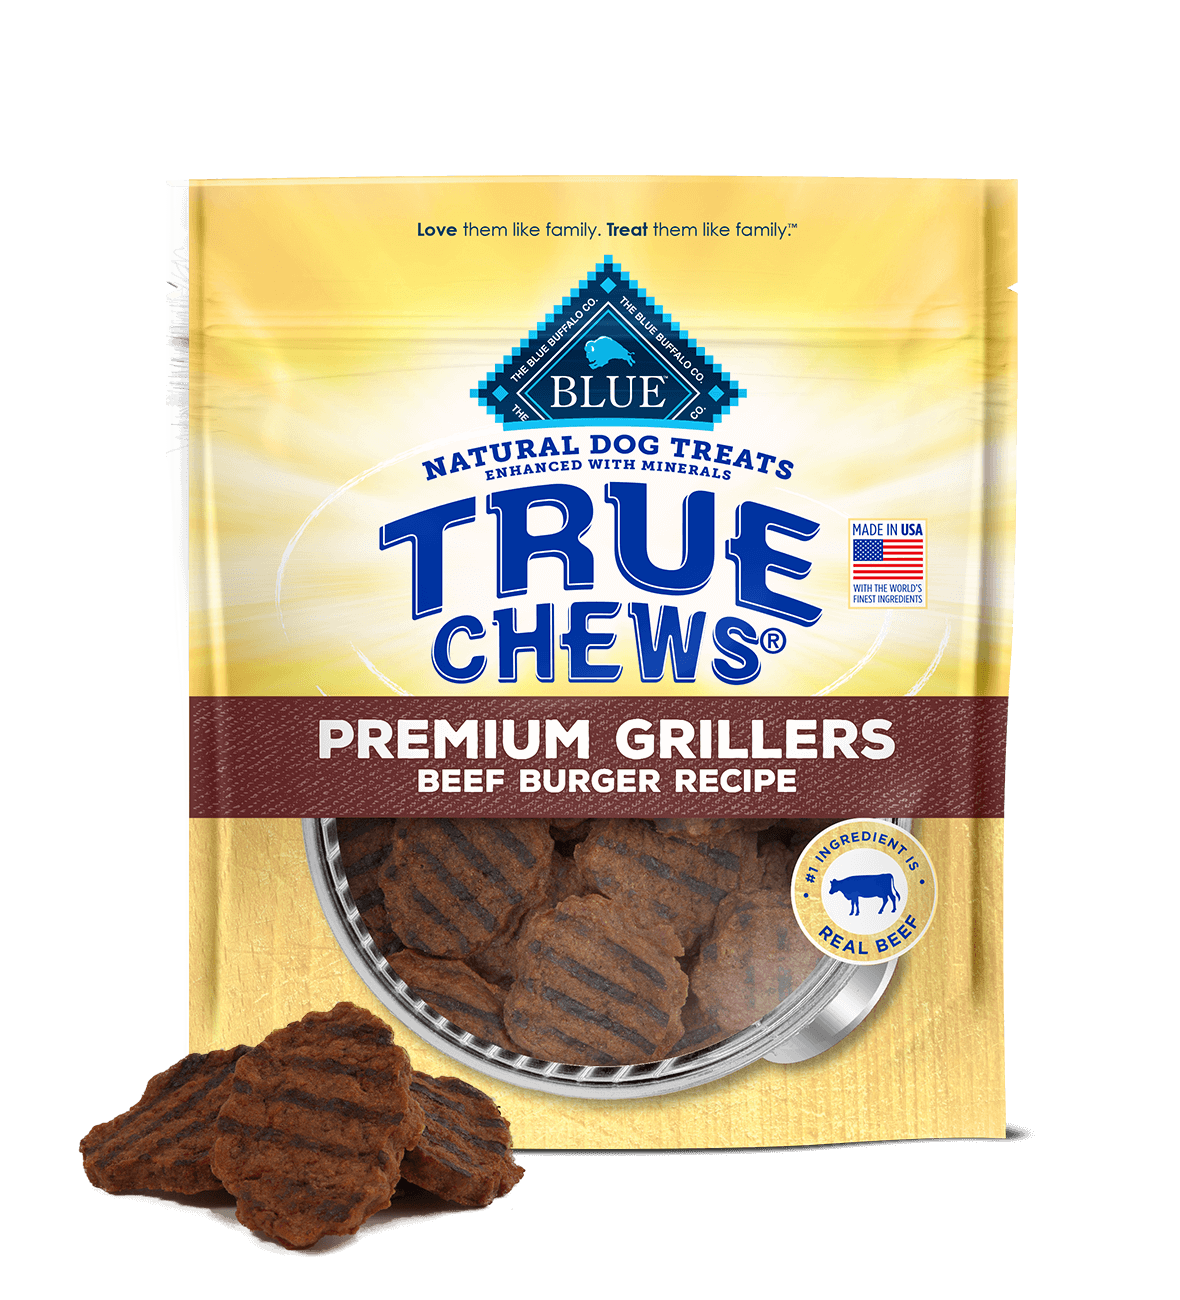 blue true chews ® deliciously charred premium beef grillers dog treats